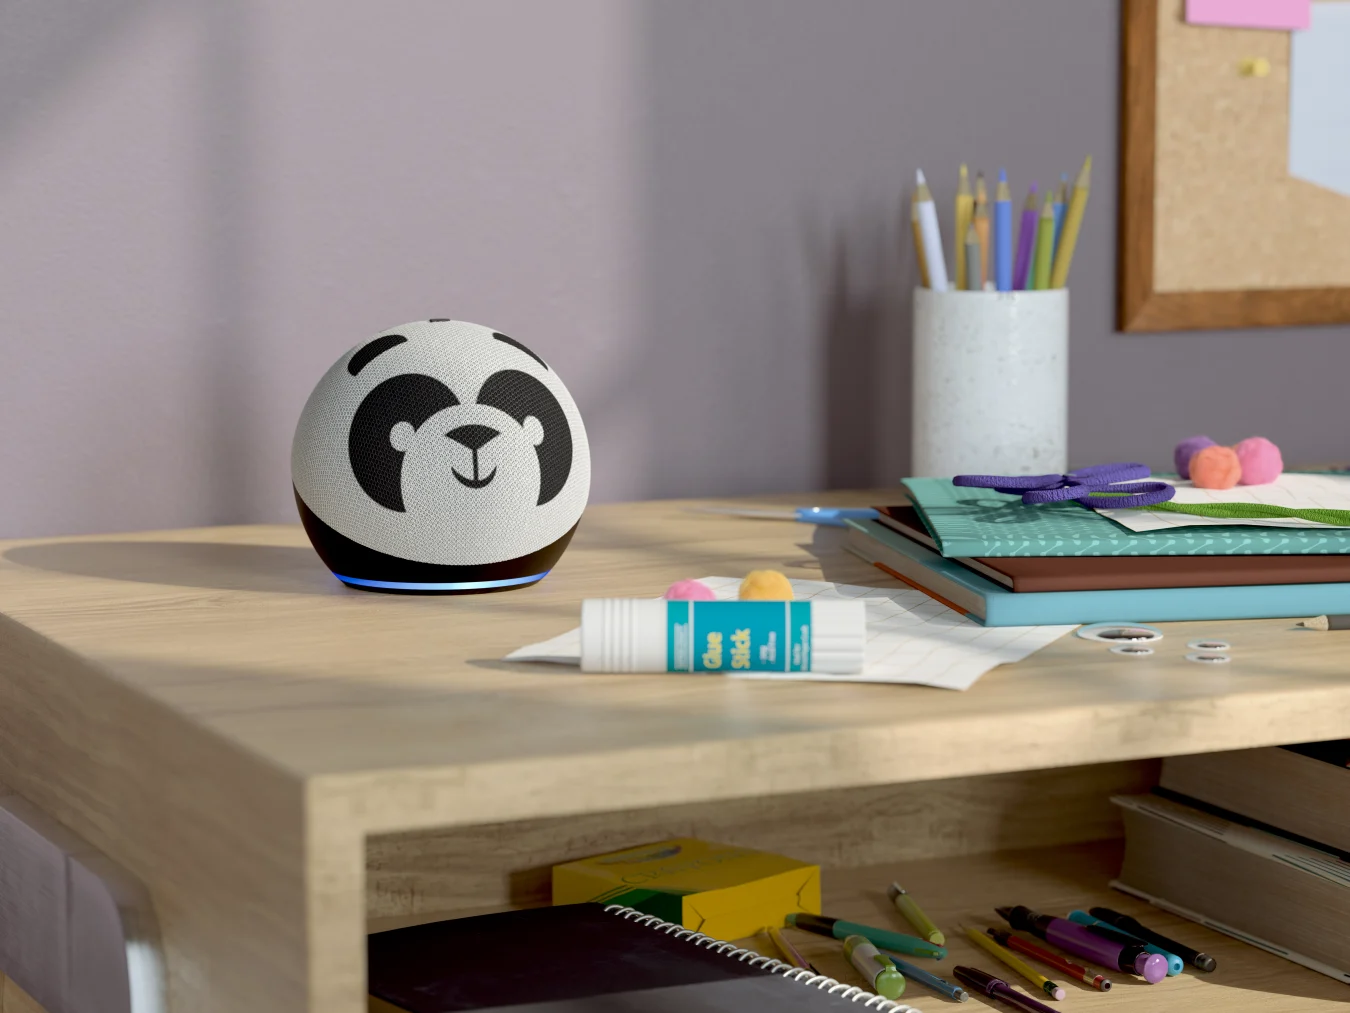 Panda Echo Dot on a table full of craft supplies